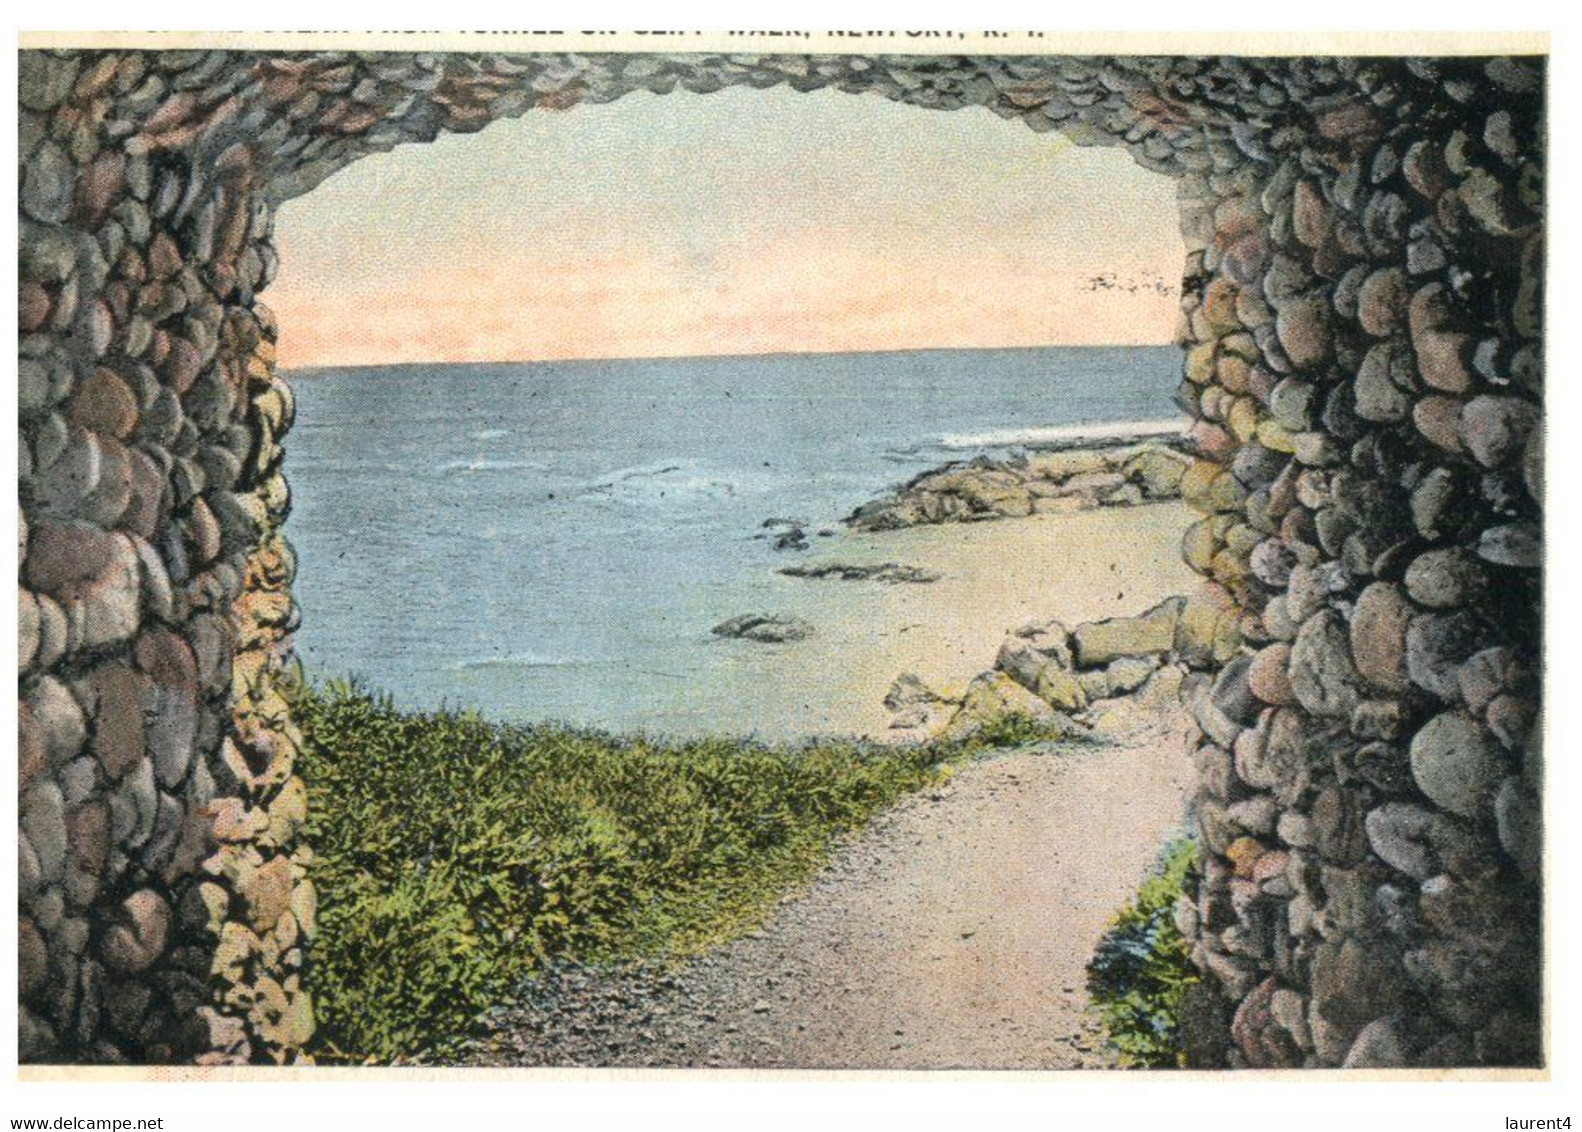 (SS 27) Very Old - USA - Newport Rhode Island - Glimpse Of The Ocean From Tunnel On Cliff Walk - Newport